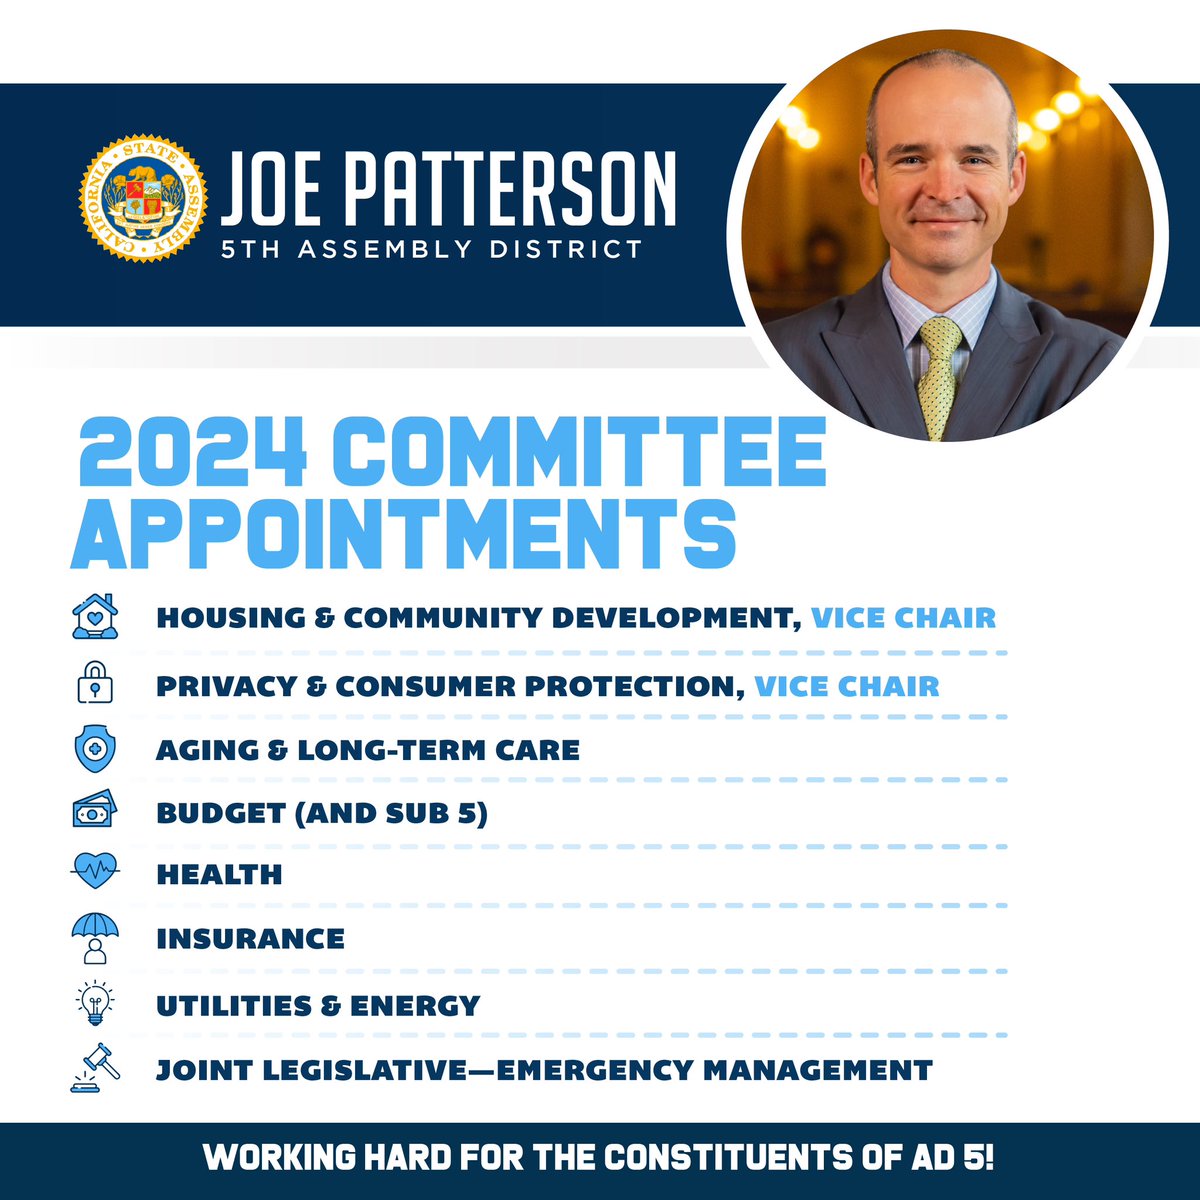 These are some great committees I’m looking forward to serving on!